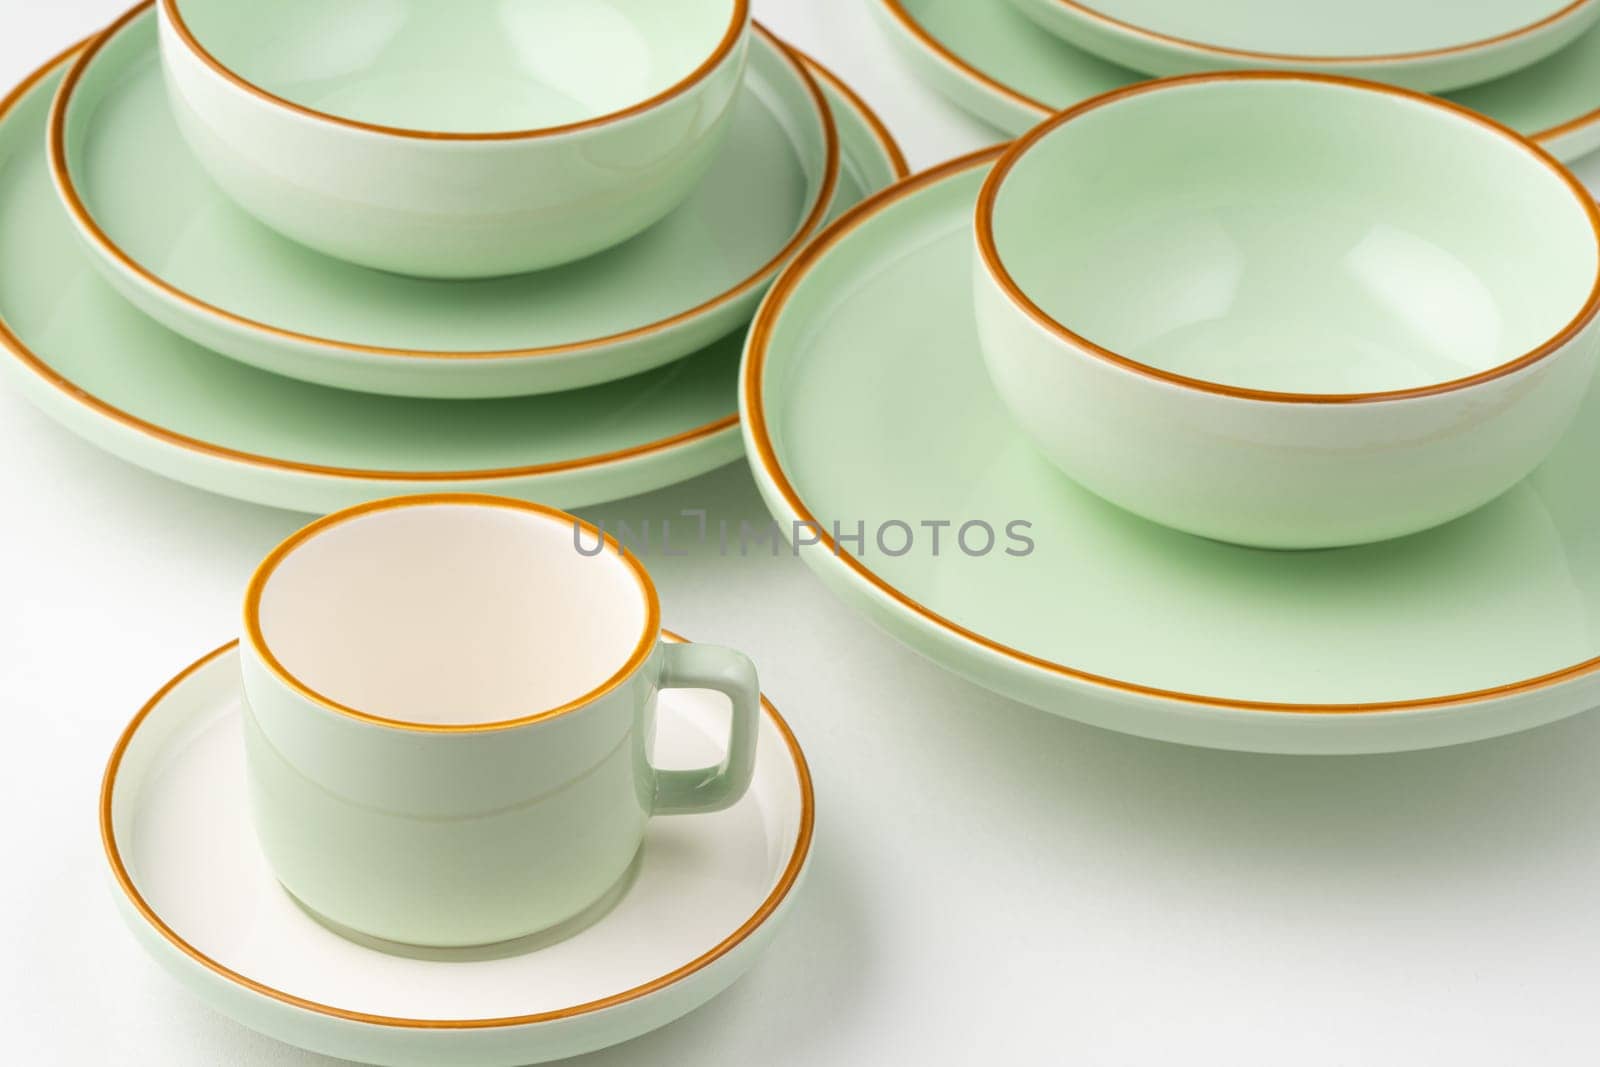 A set of white and pastel green ceramic tableware with orange outlines